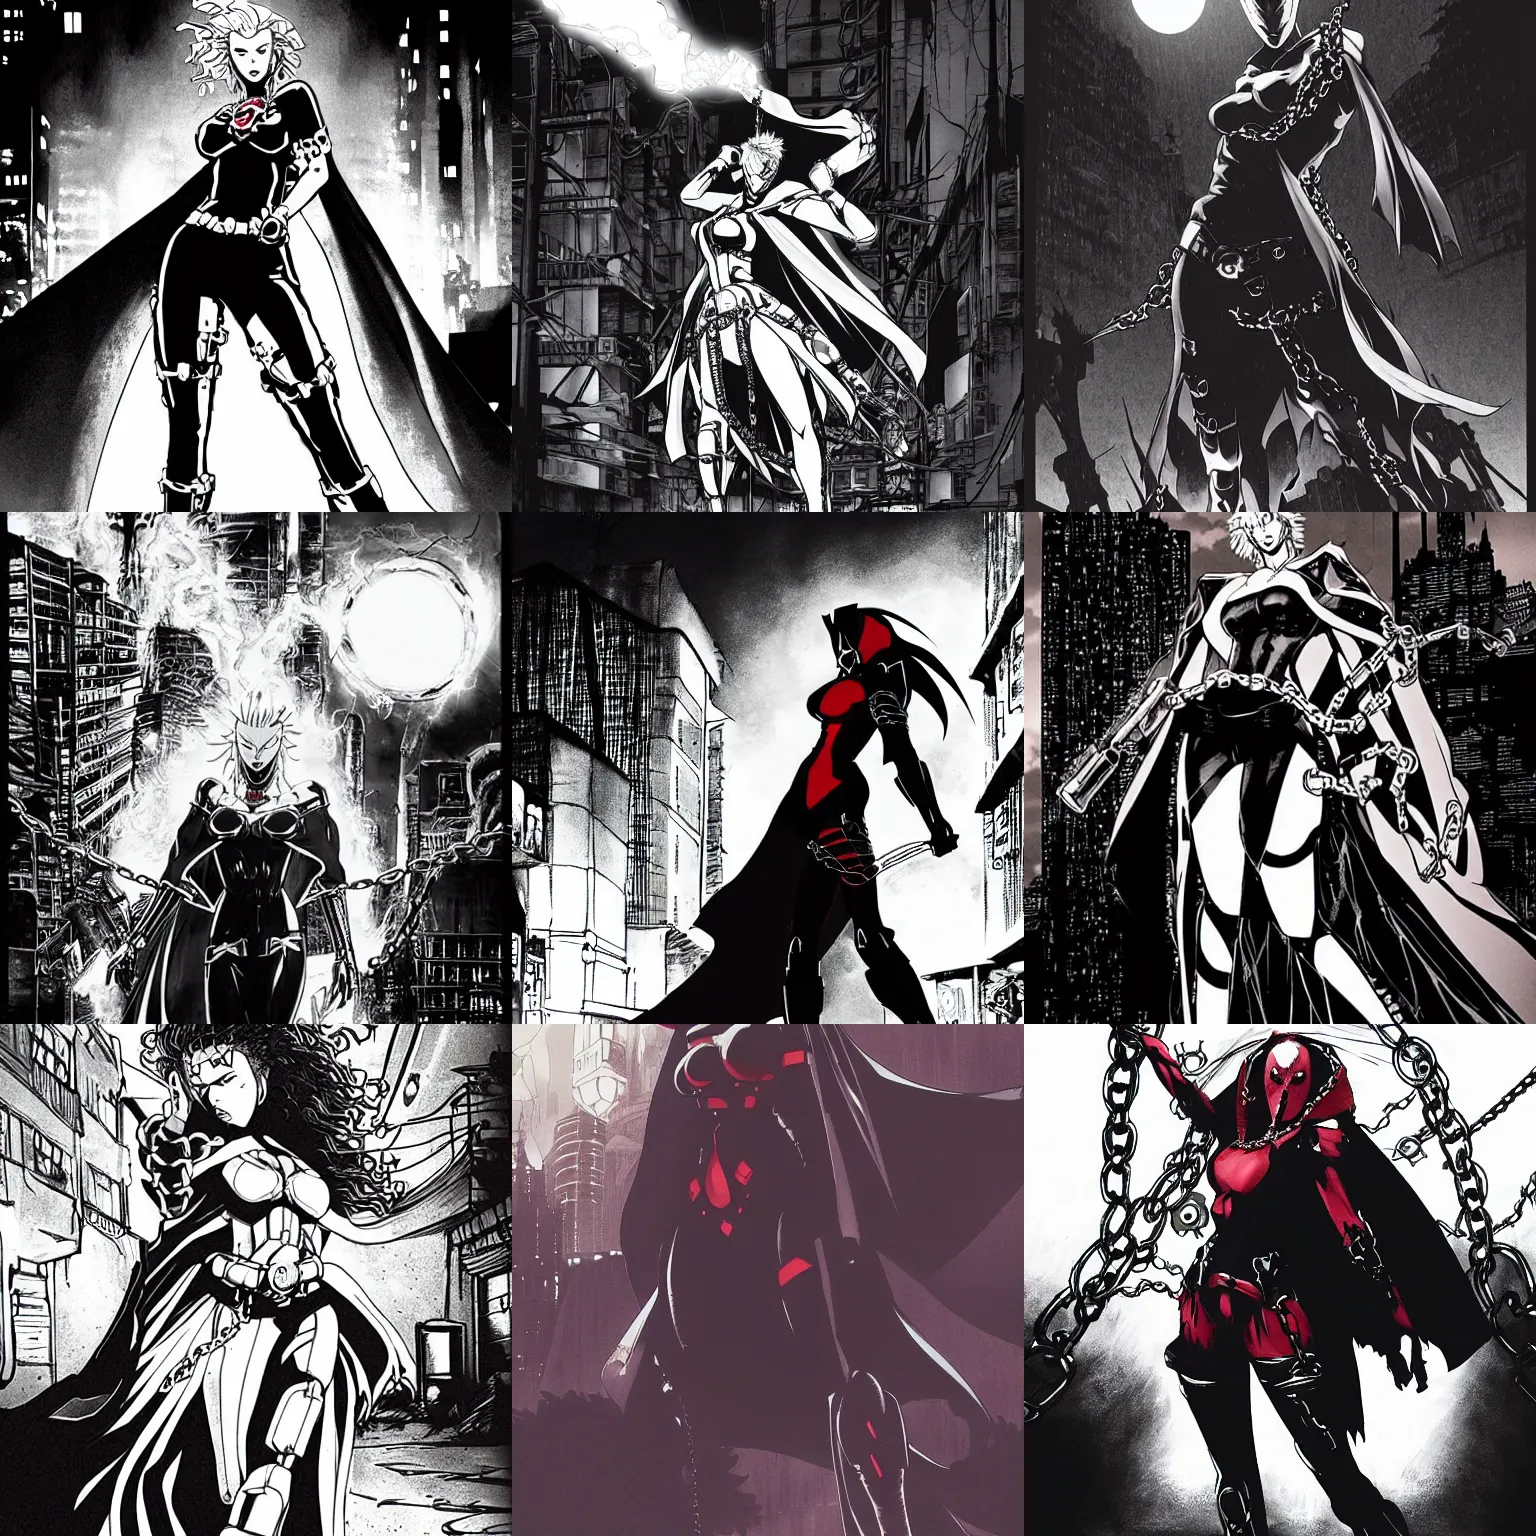 Prompt: scarlett johansson as spawn with swinging chains and cape in afro samurai anime style pencil and ink manga, full body action pose, dramatic lighting in a post apocalyptic cyberpunk city, at night with dramatic moonlight